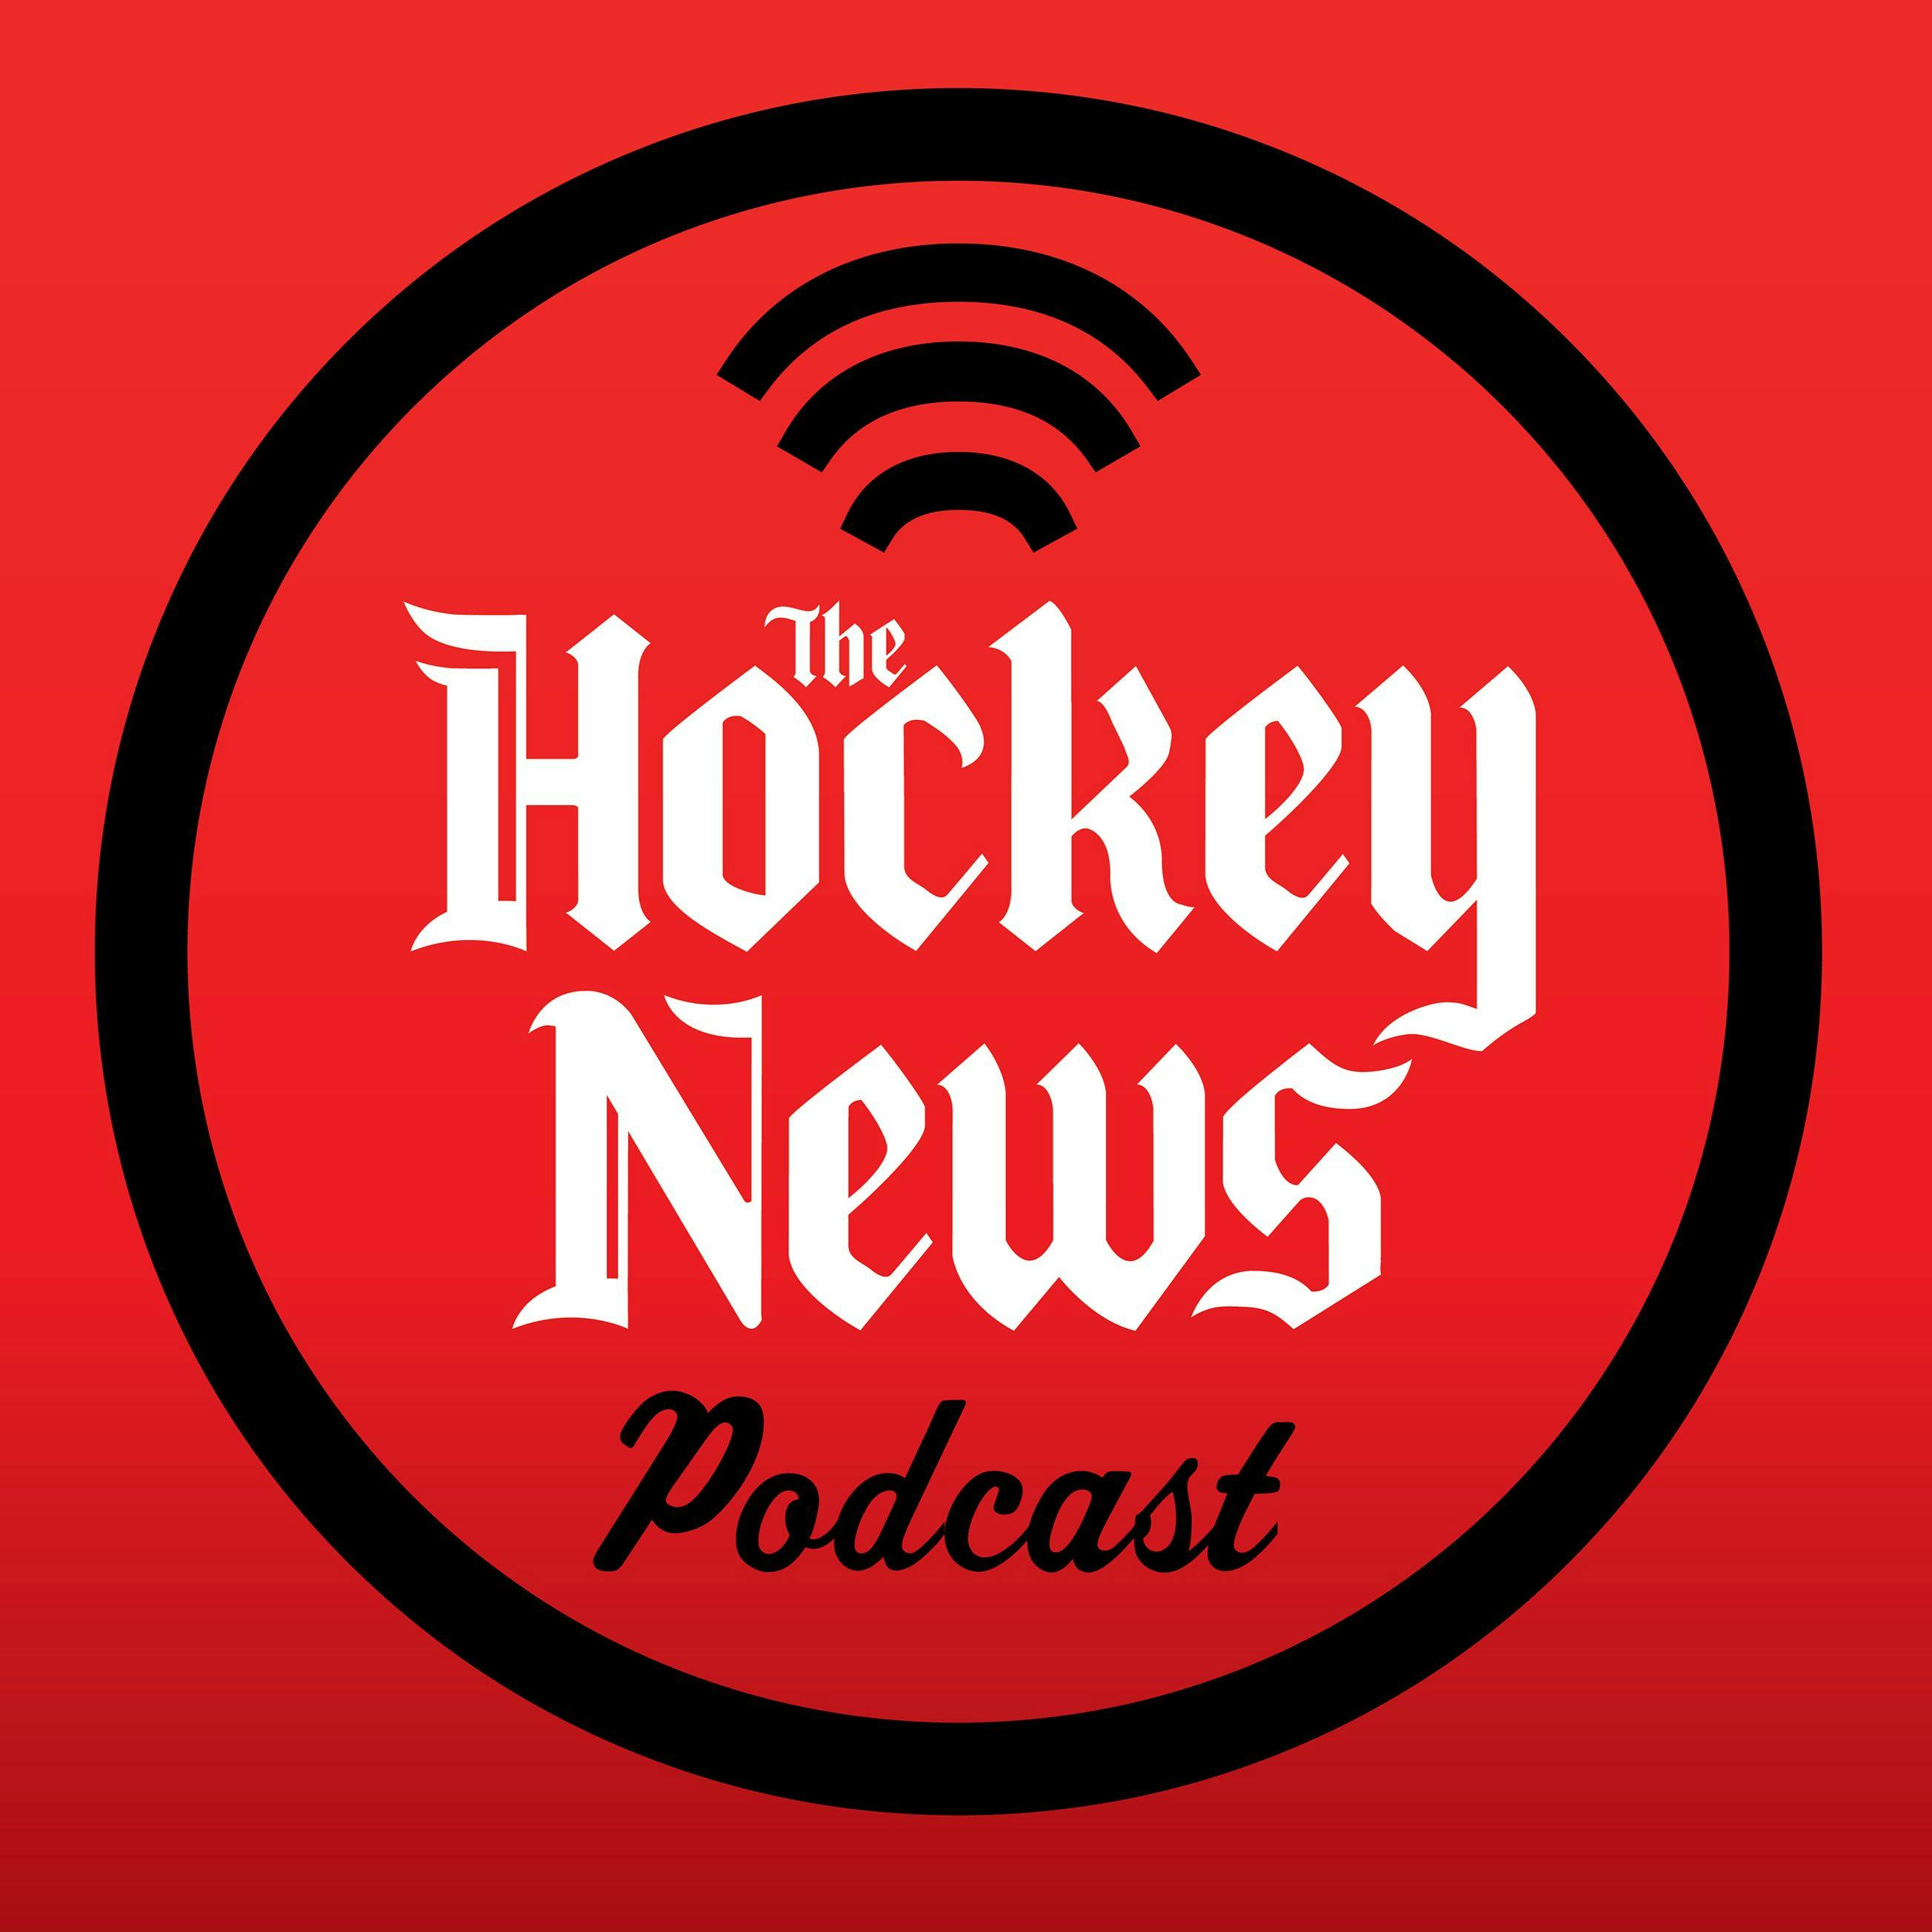 The Hockey News Podcast: Hot and Cold Starts to the NHL Season